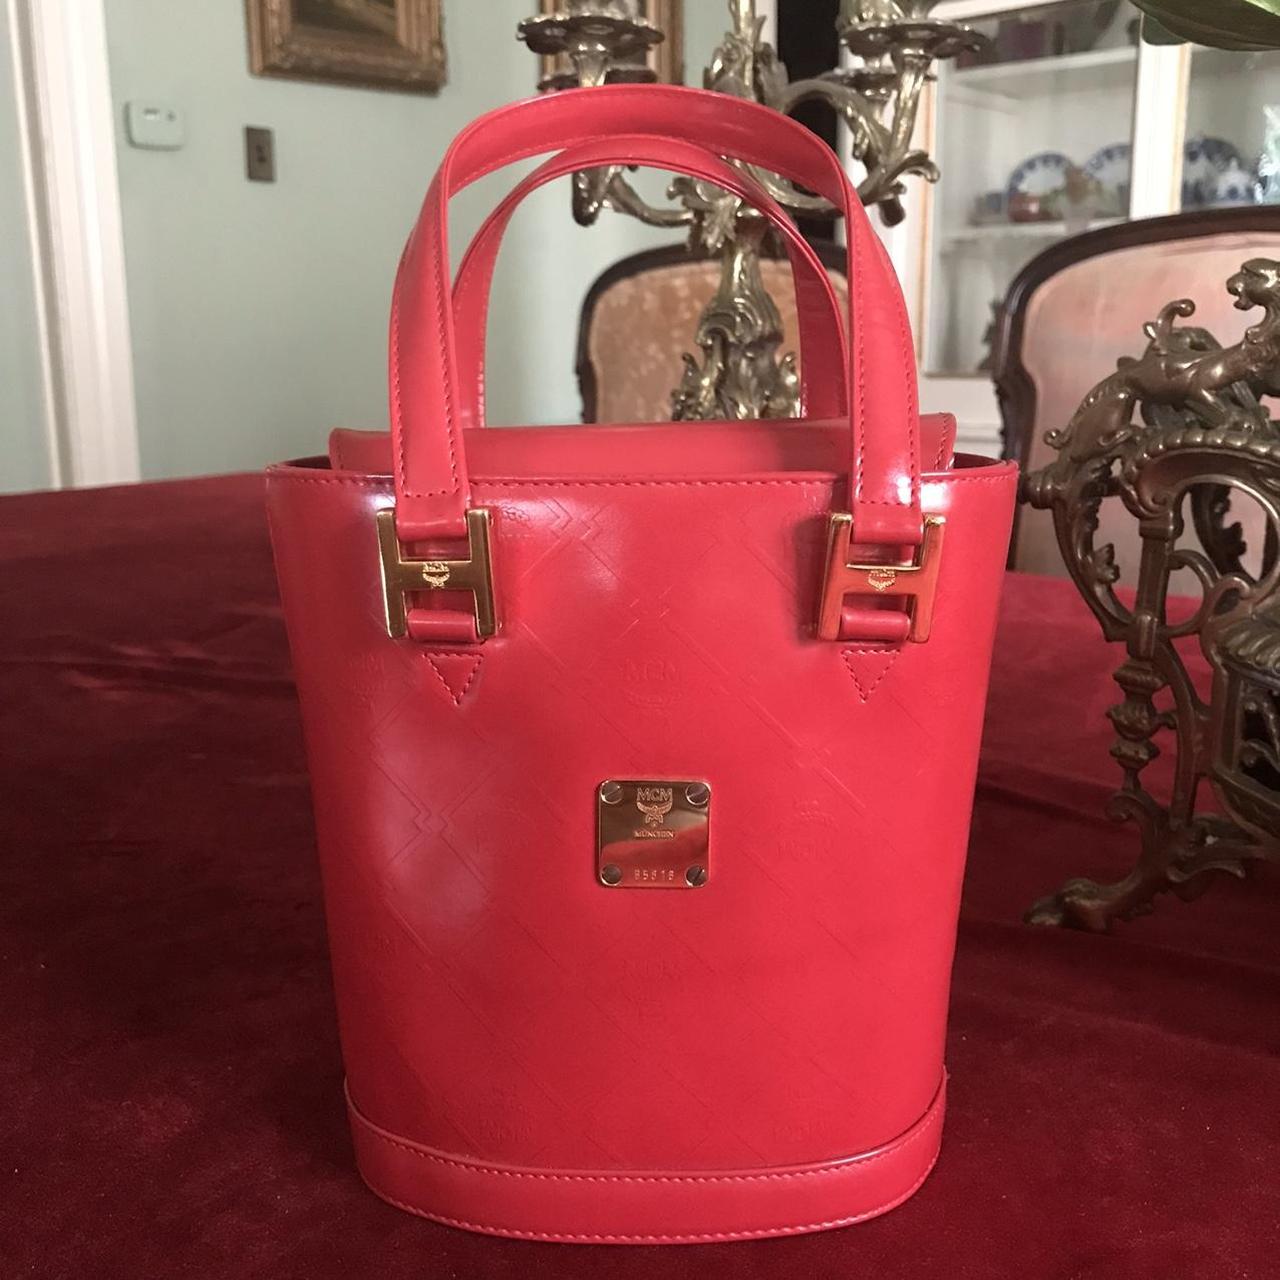 Authentic MCM Bucket Bag (Pre-Owned)